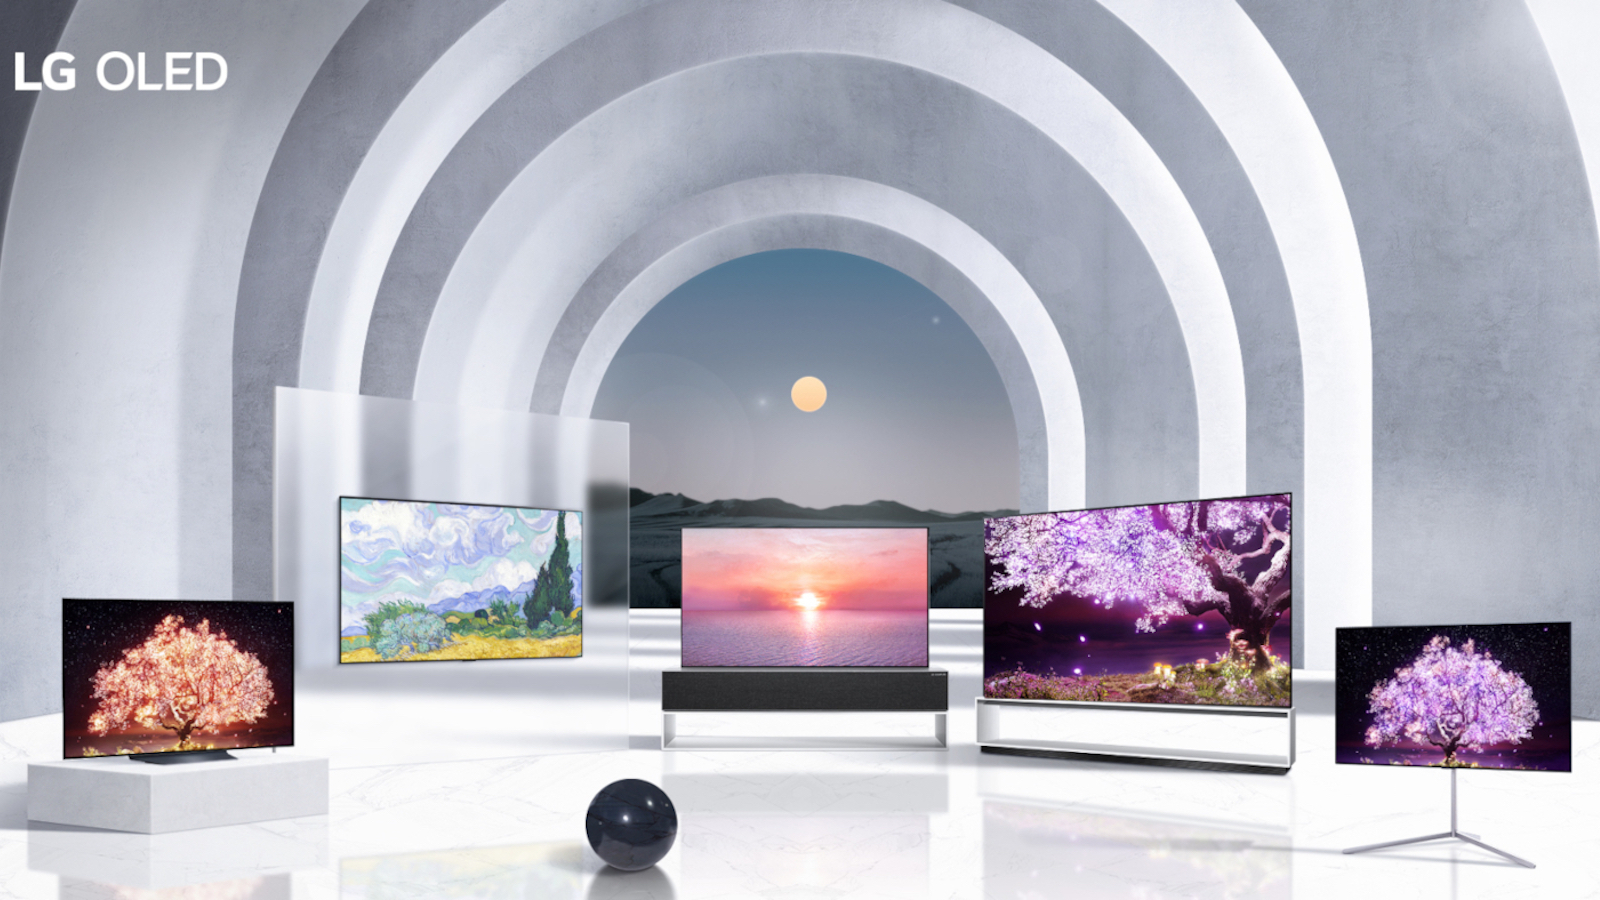 lg’s-2021-tvs-are-rolling-out-globally,-line-up-includes-4k-oled-and-mini-led-models